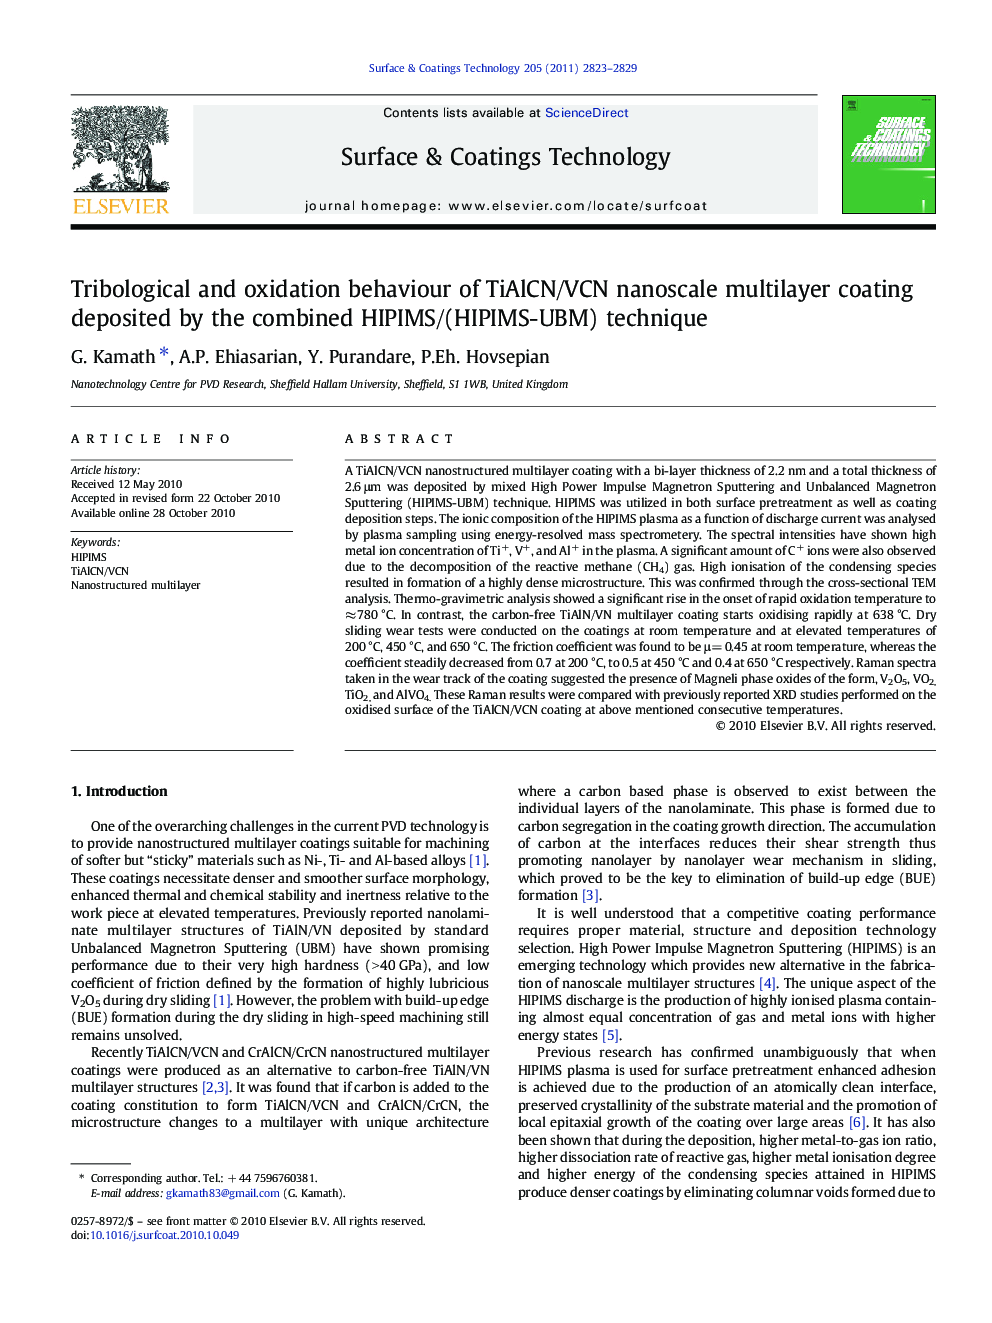 Tribological and oxidation behaviour of TiAlCN/VCN nanoscale multilayer coating deposited by the combined HIPIMS/(HIPIMS-UBM) technique